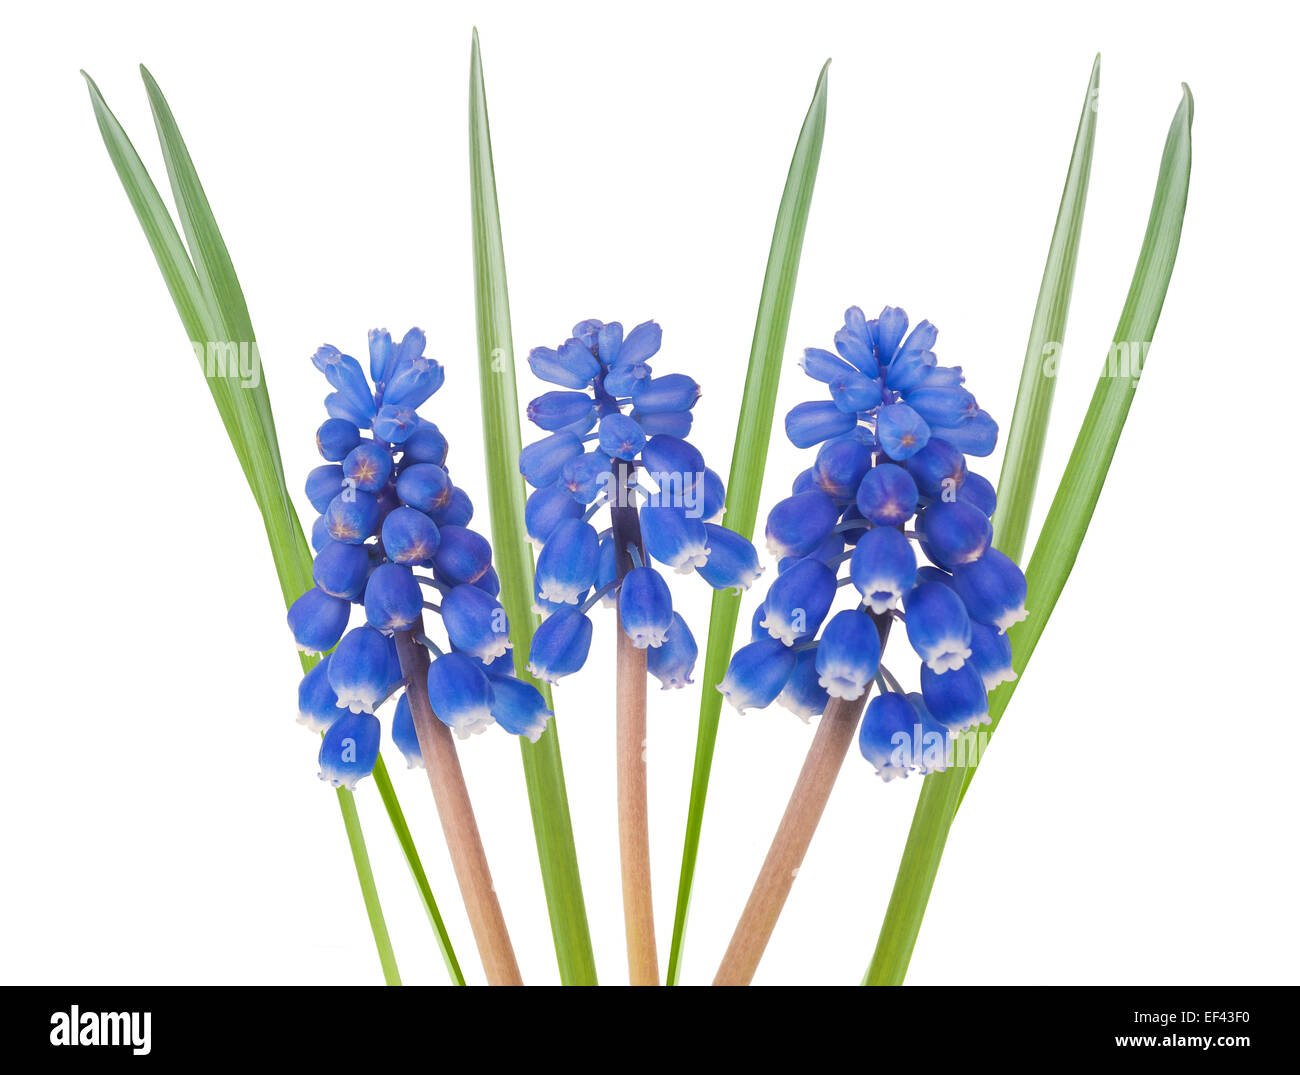 muscari flowers with leaves isolated on white background Stock Photo